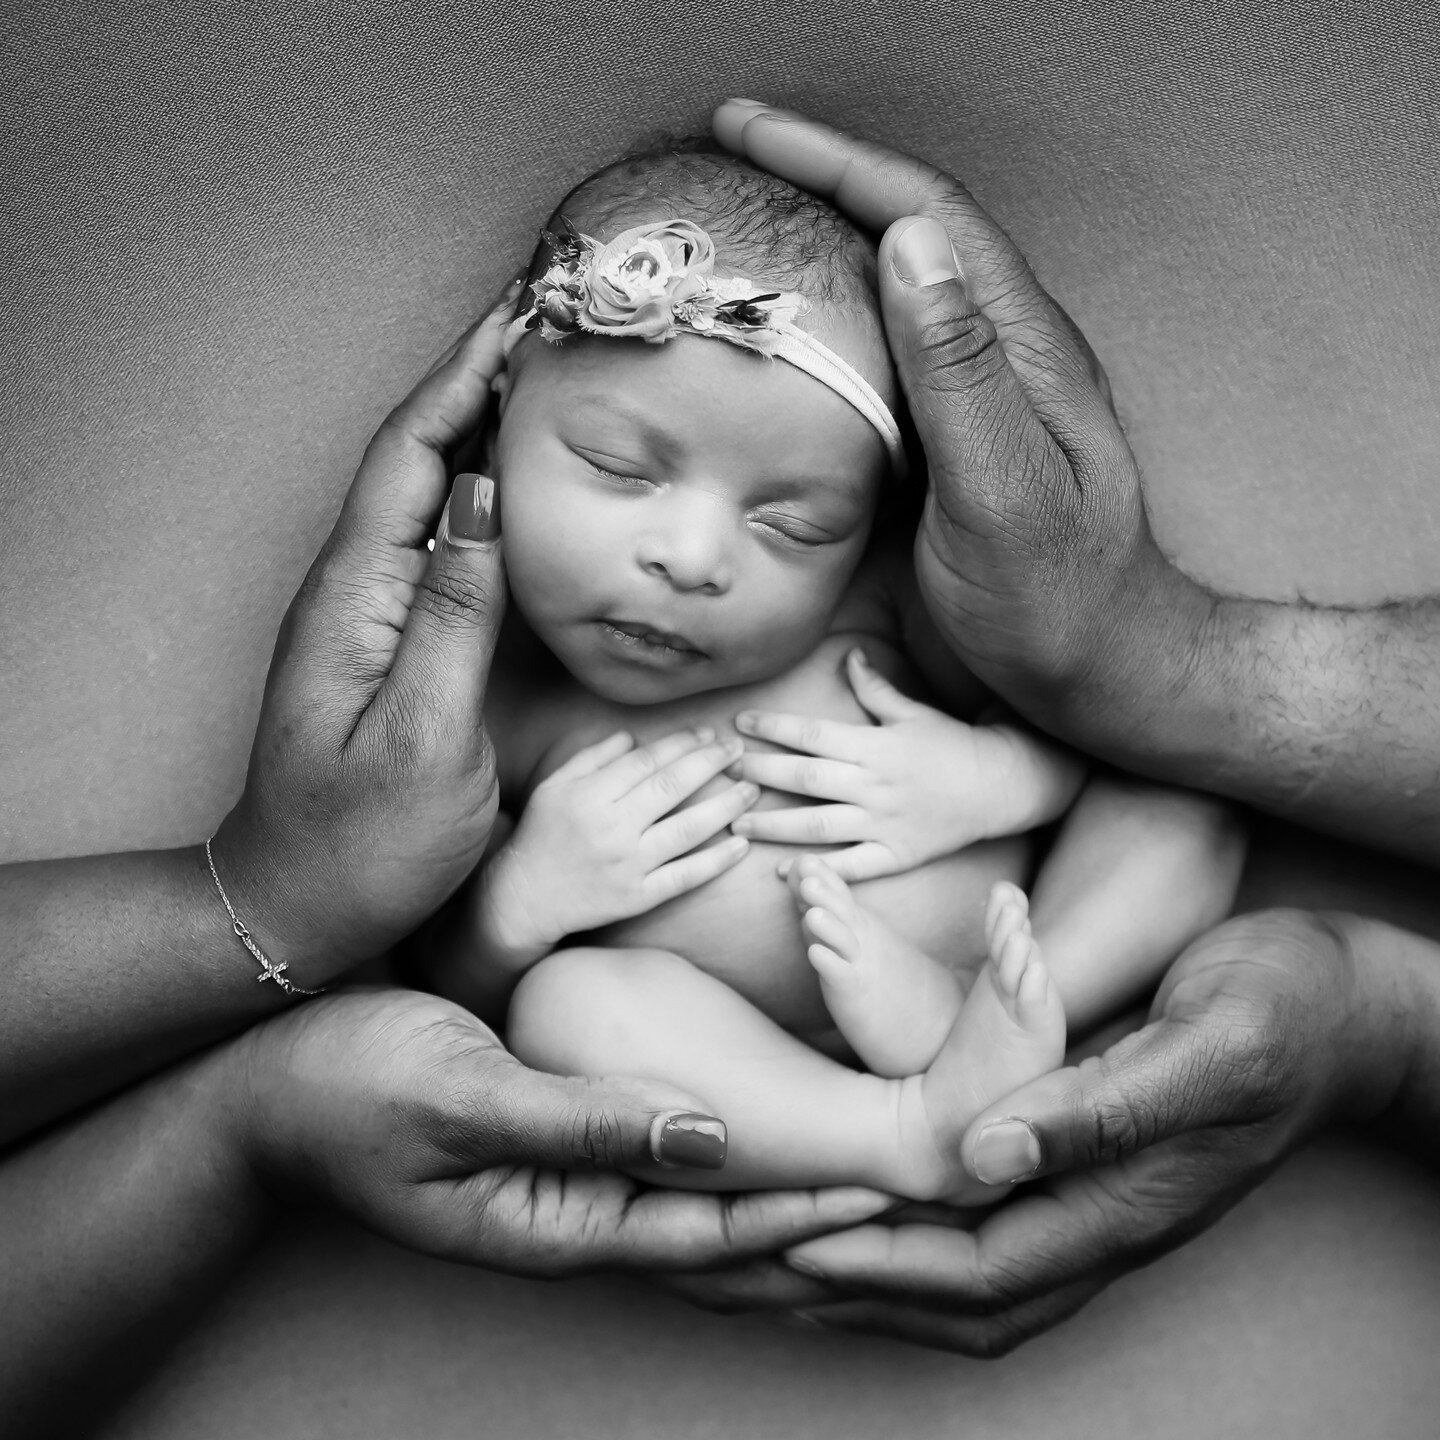 all curled up in the best arms possible....
Pricing and Packages on the website.

#NewbornPhotography
#CaliforniaPhotographer
#CelebrityPhotographer
#NewbornPosing
#PhotographyTips
#BehindTheScenes
#BTSPhotography
#newbornPhotographyTutorials
#newbor